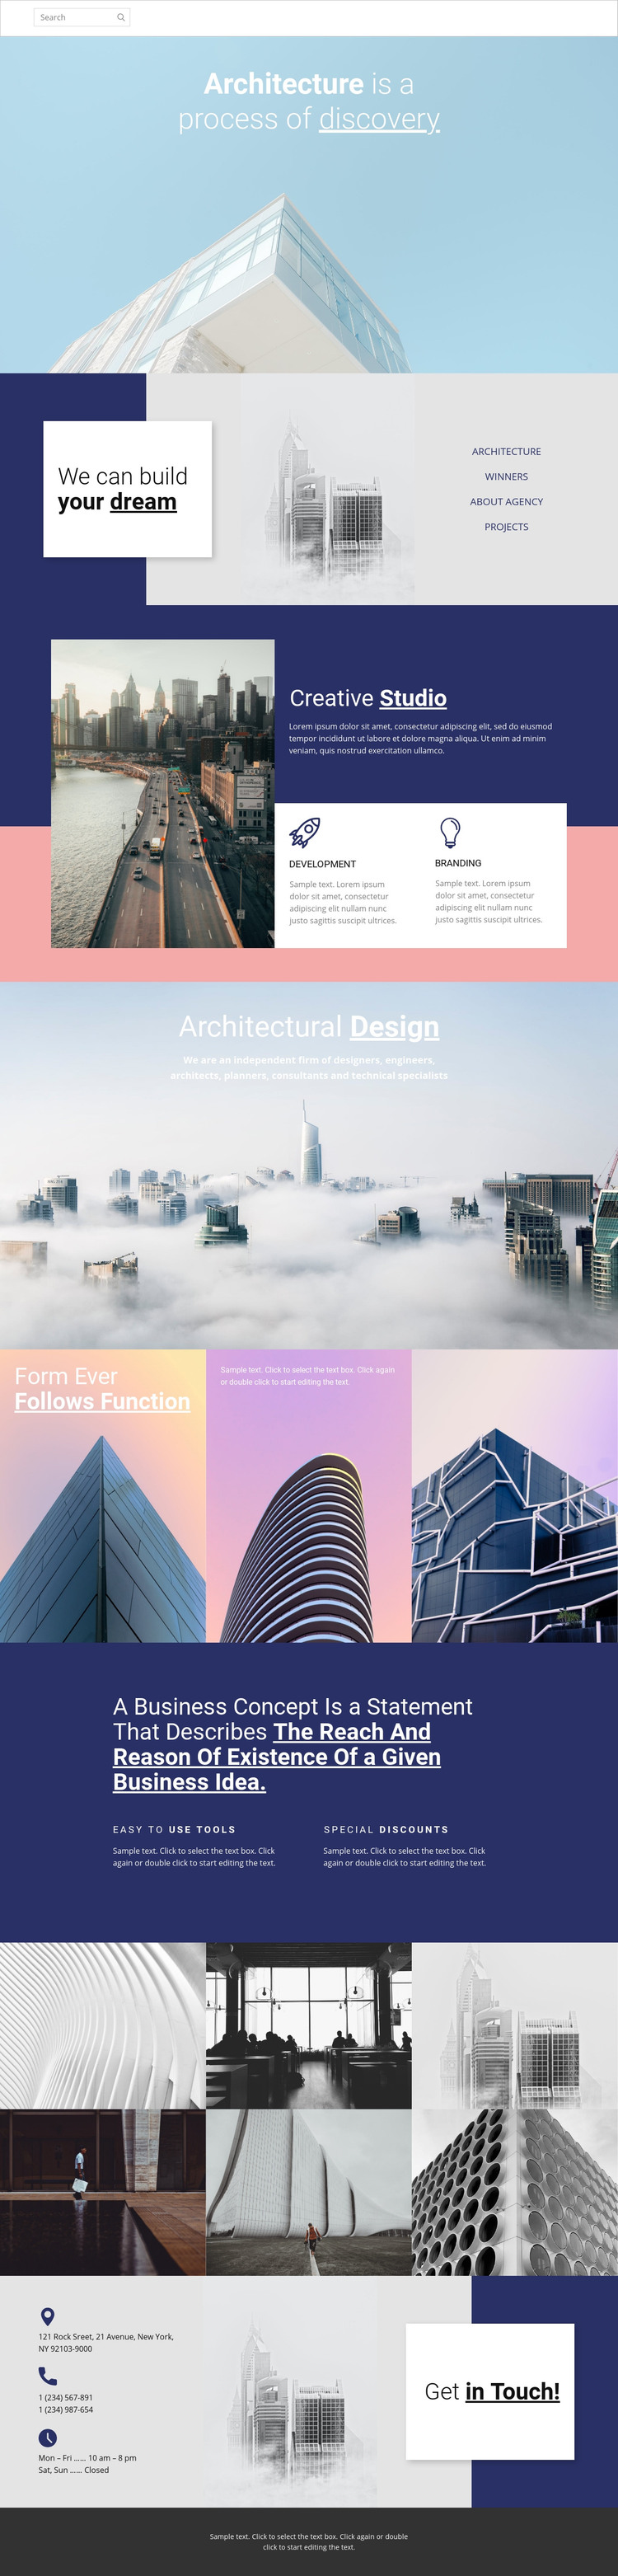 Wonders of architecture Homepage Design